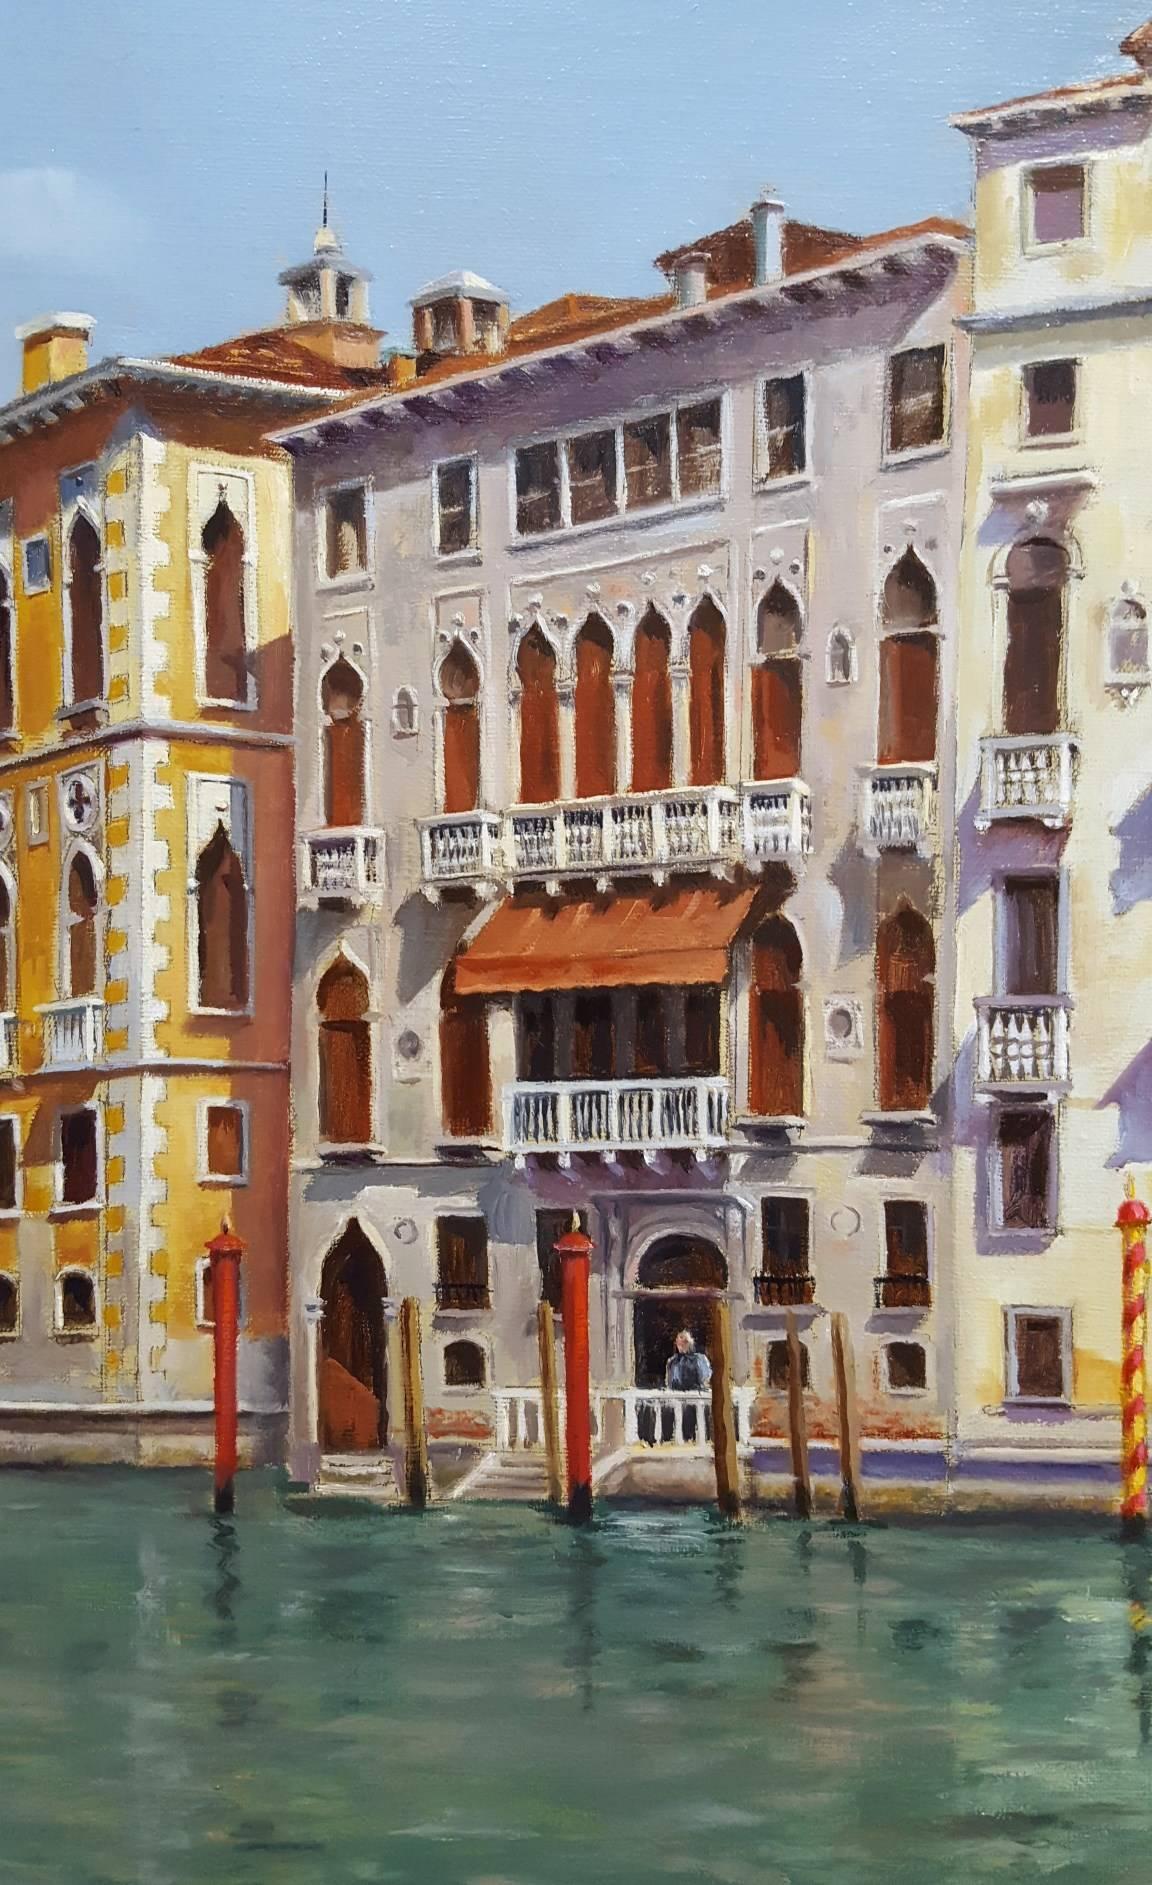 An original signed oil on linen canvas by English artist Christopher Stone (1933-) titled "Ponte dell'Accademia - Venice", 2015. Hand signed and dated by Stone lower left. Canvas size: 24" x 36". Beautifully framed with moulding